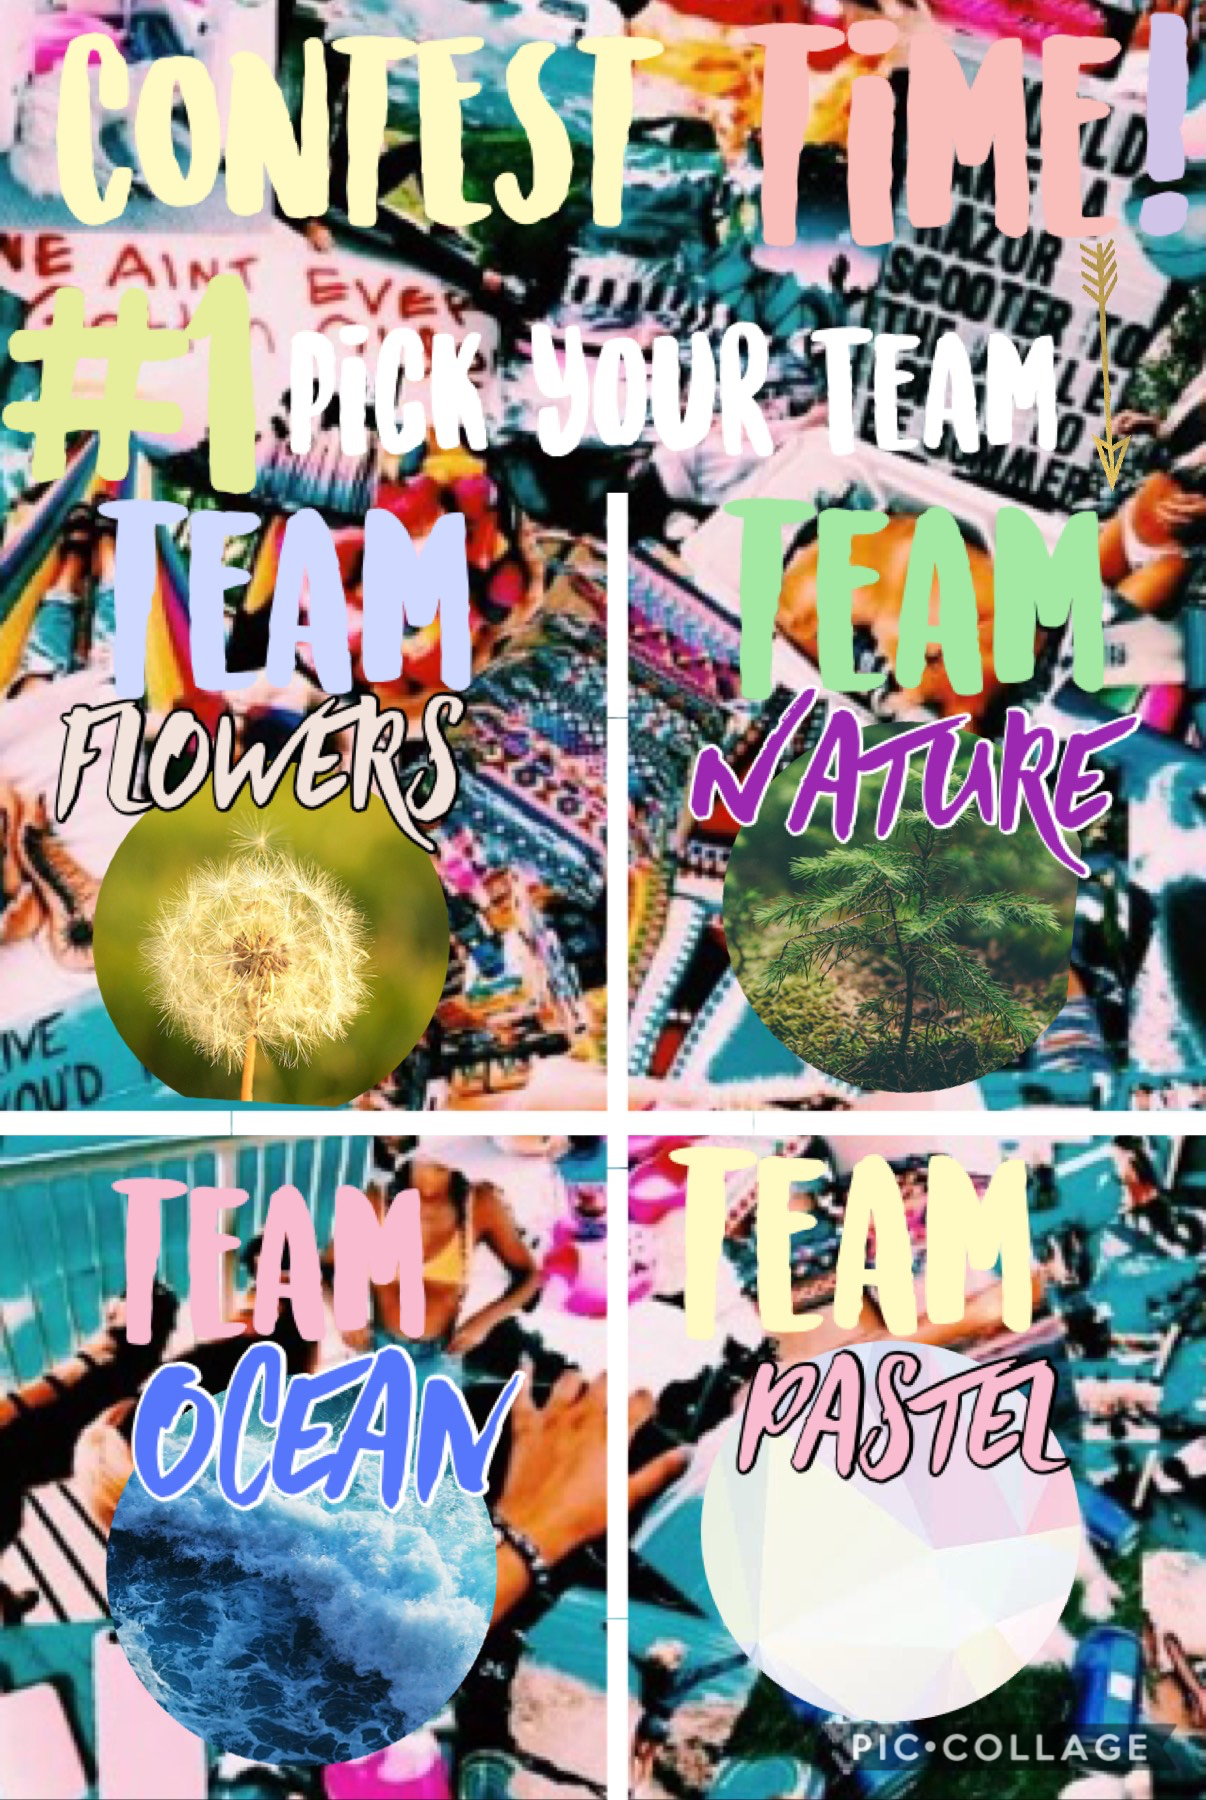                TAP                

REMIX THE TEAM YOU WANT TO BE IN!💓💓